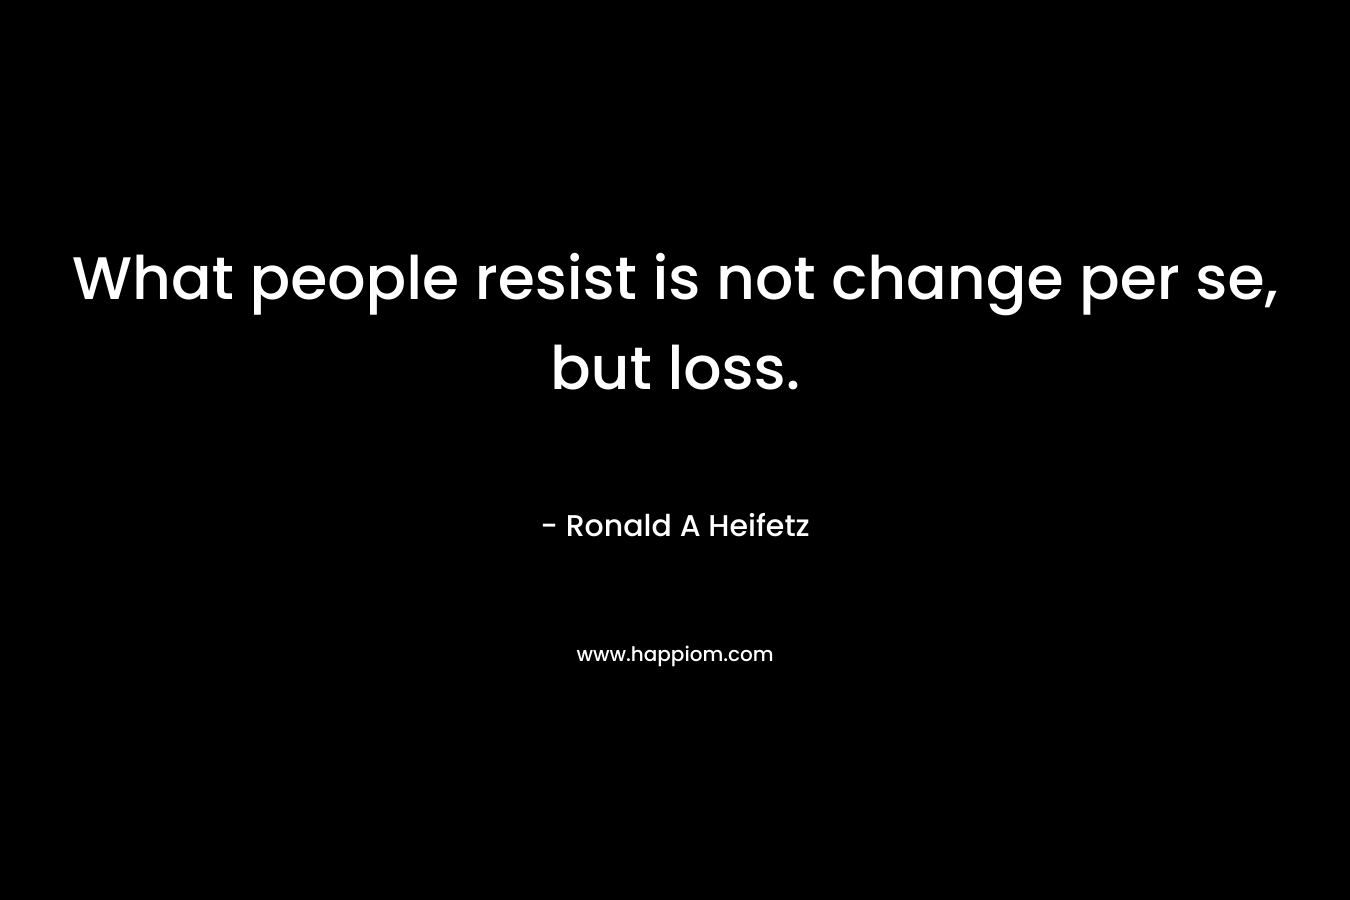 What people resist is not change per se, but loss.